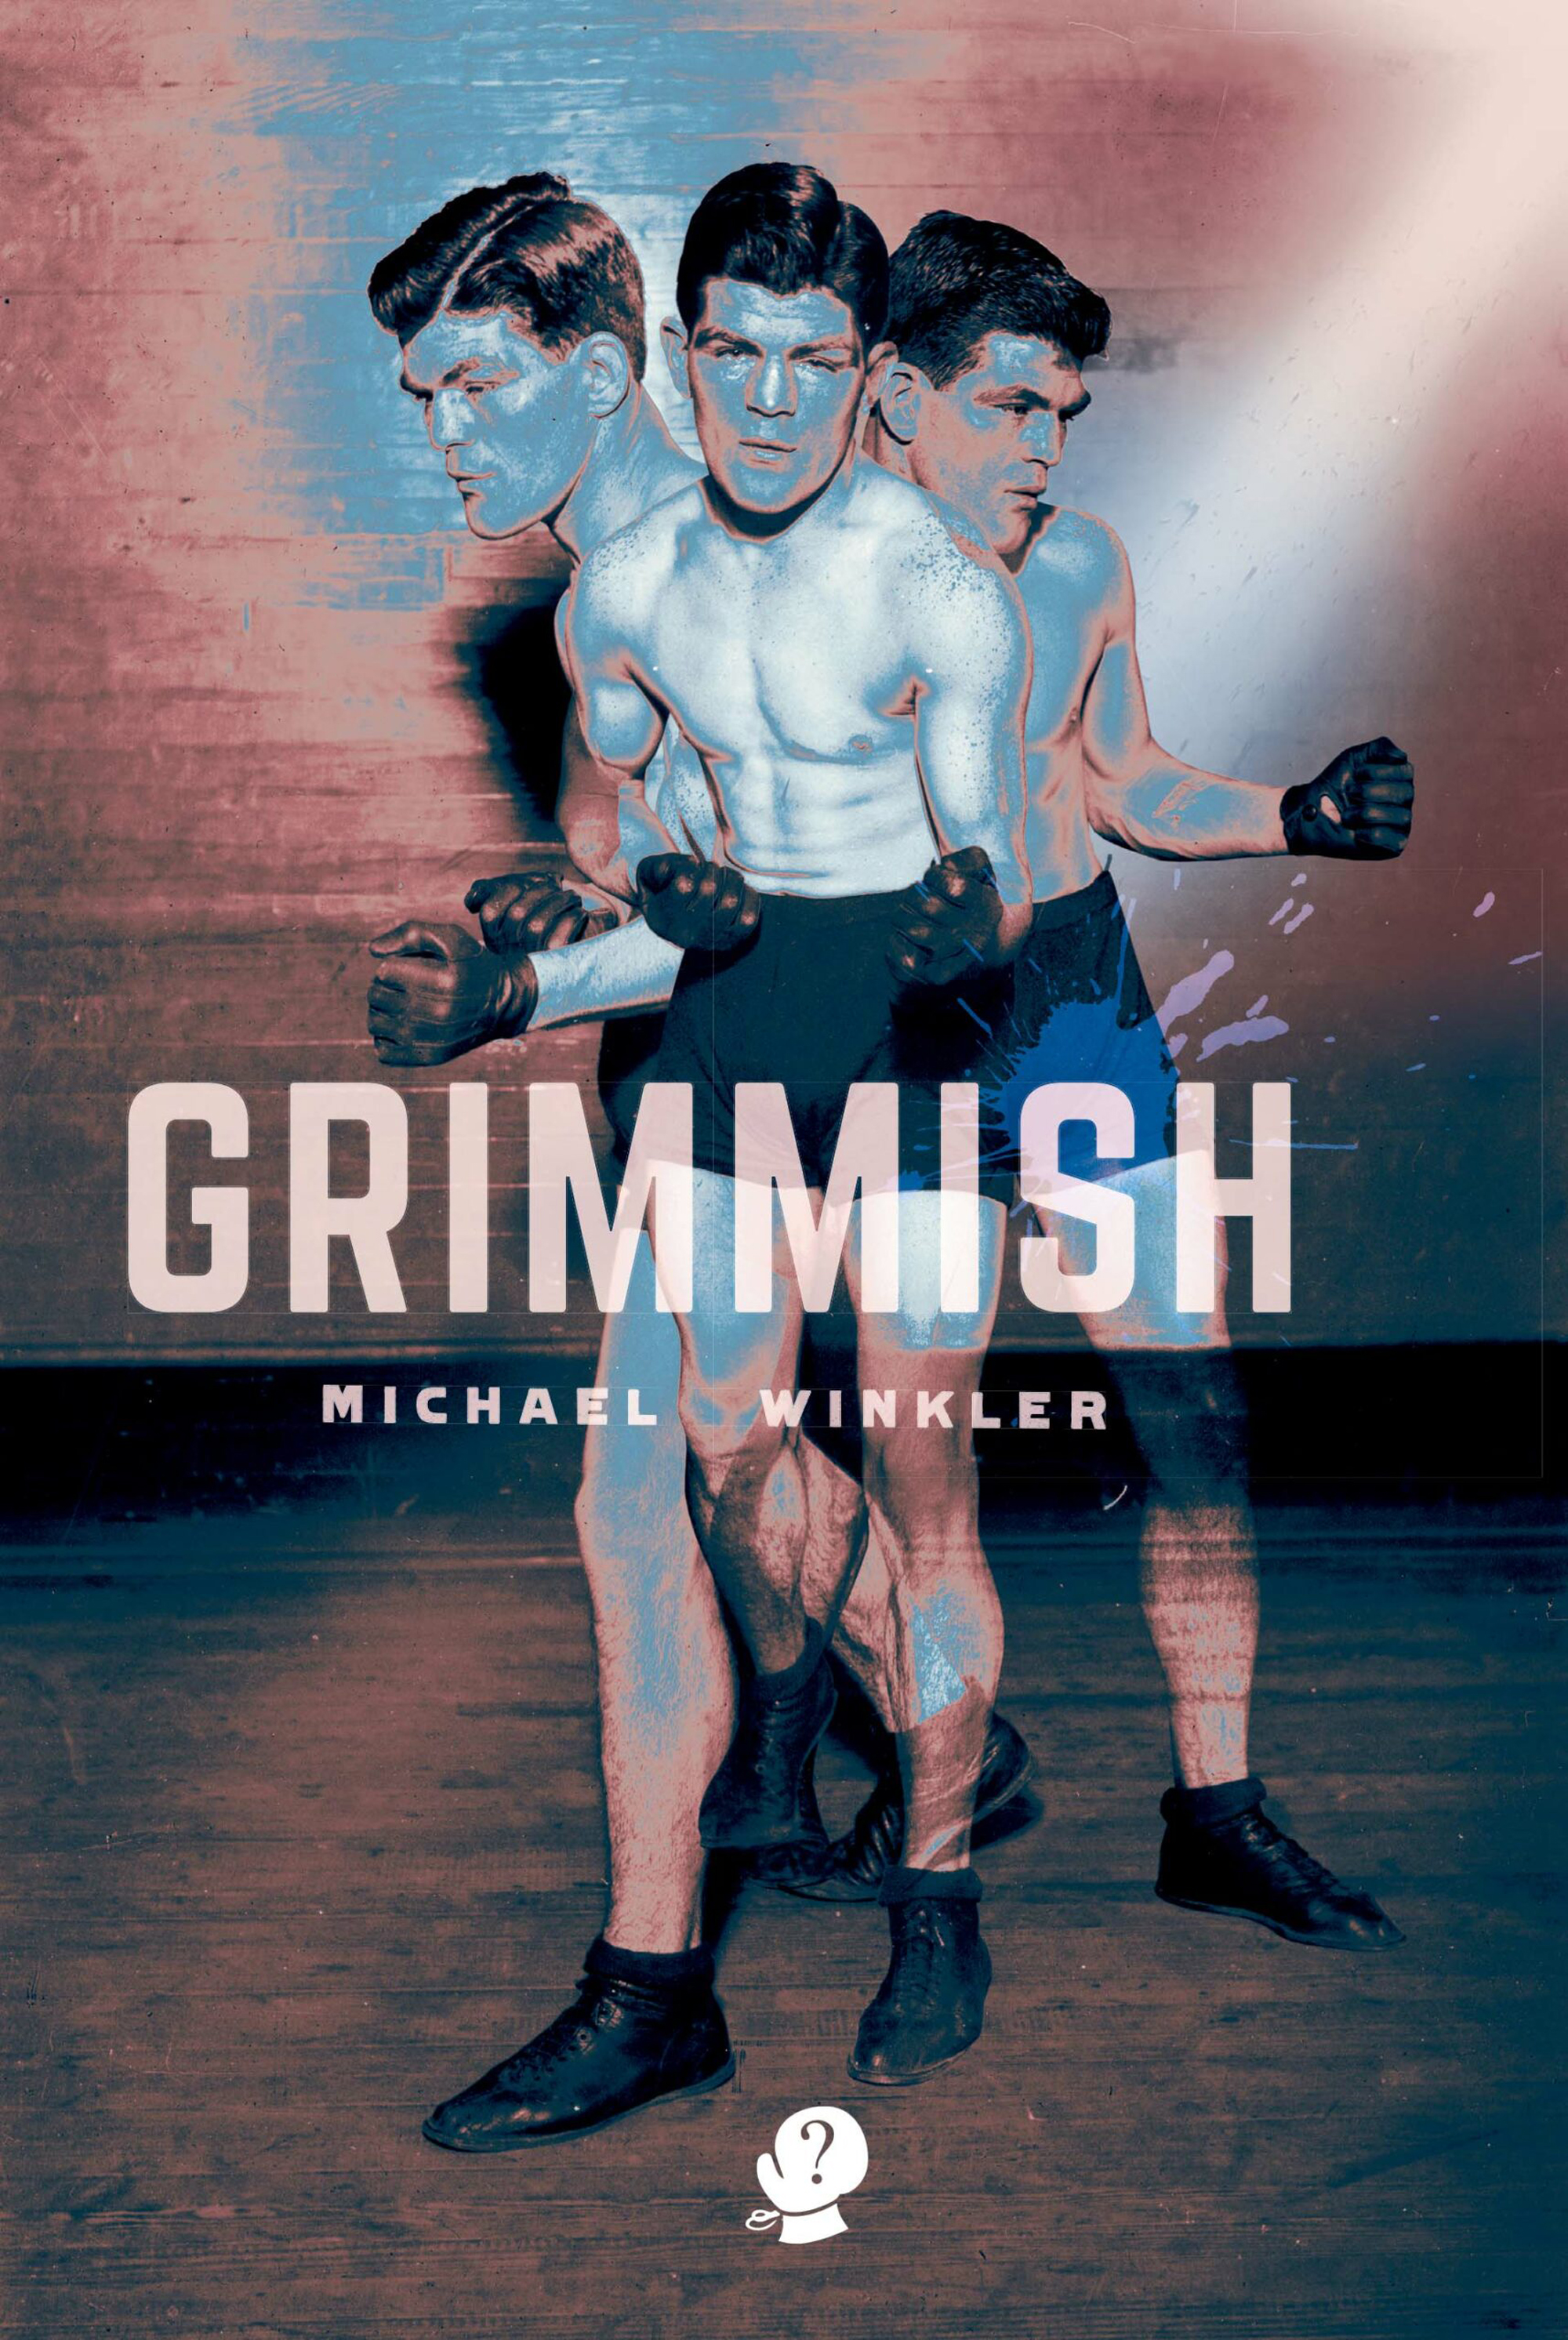 The cover of Grimmish by Michael Winkler featuring a photo collage of a boxer from three angles